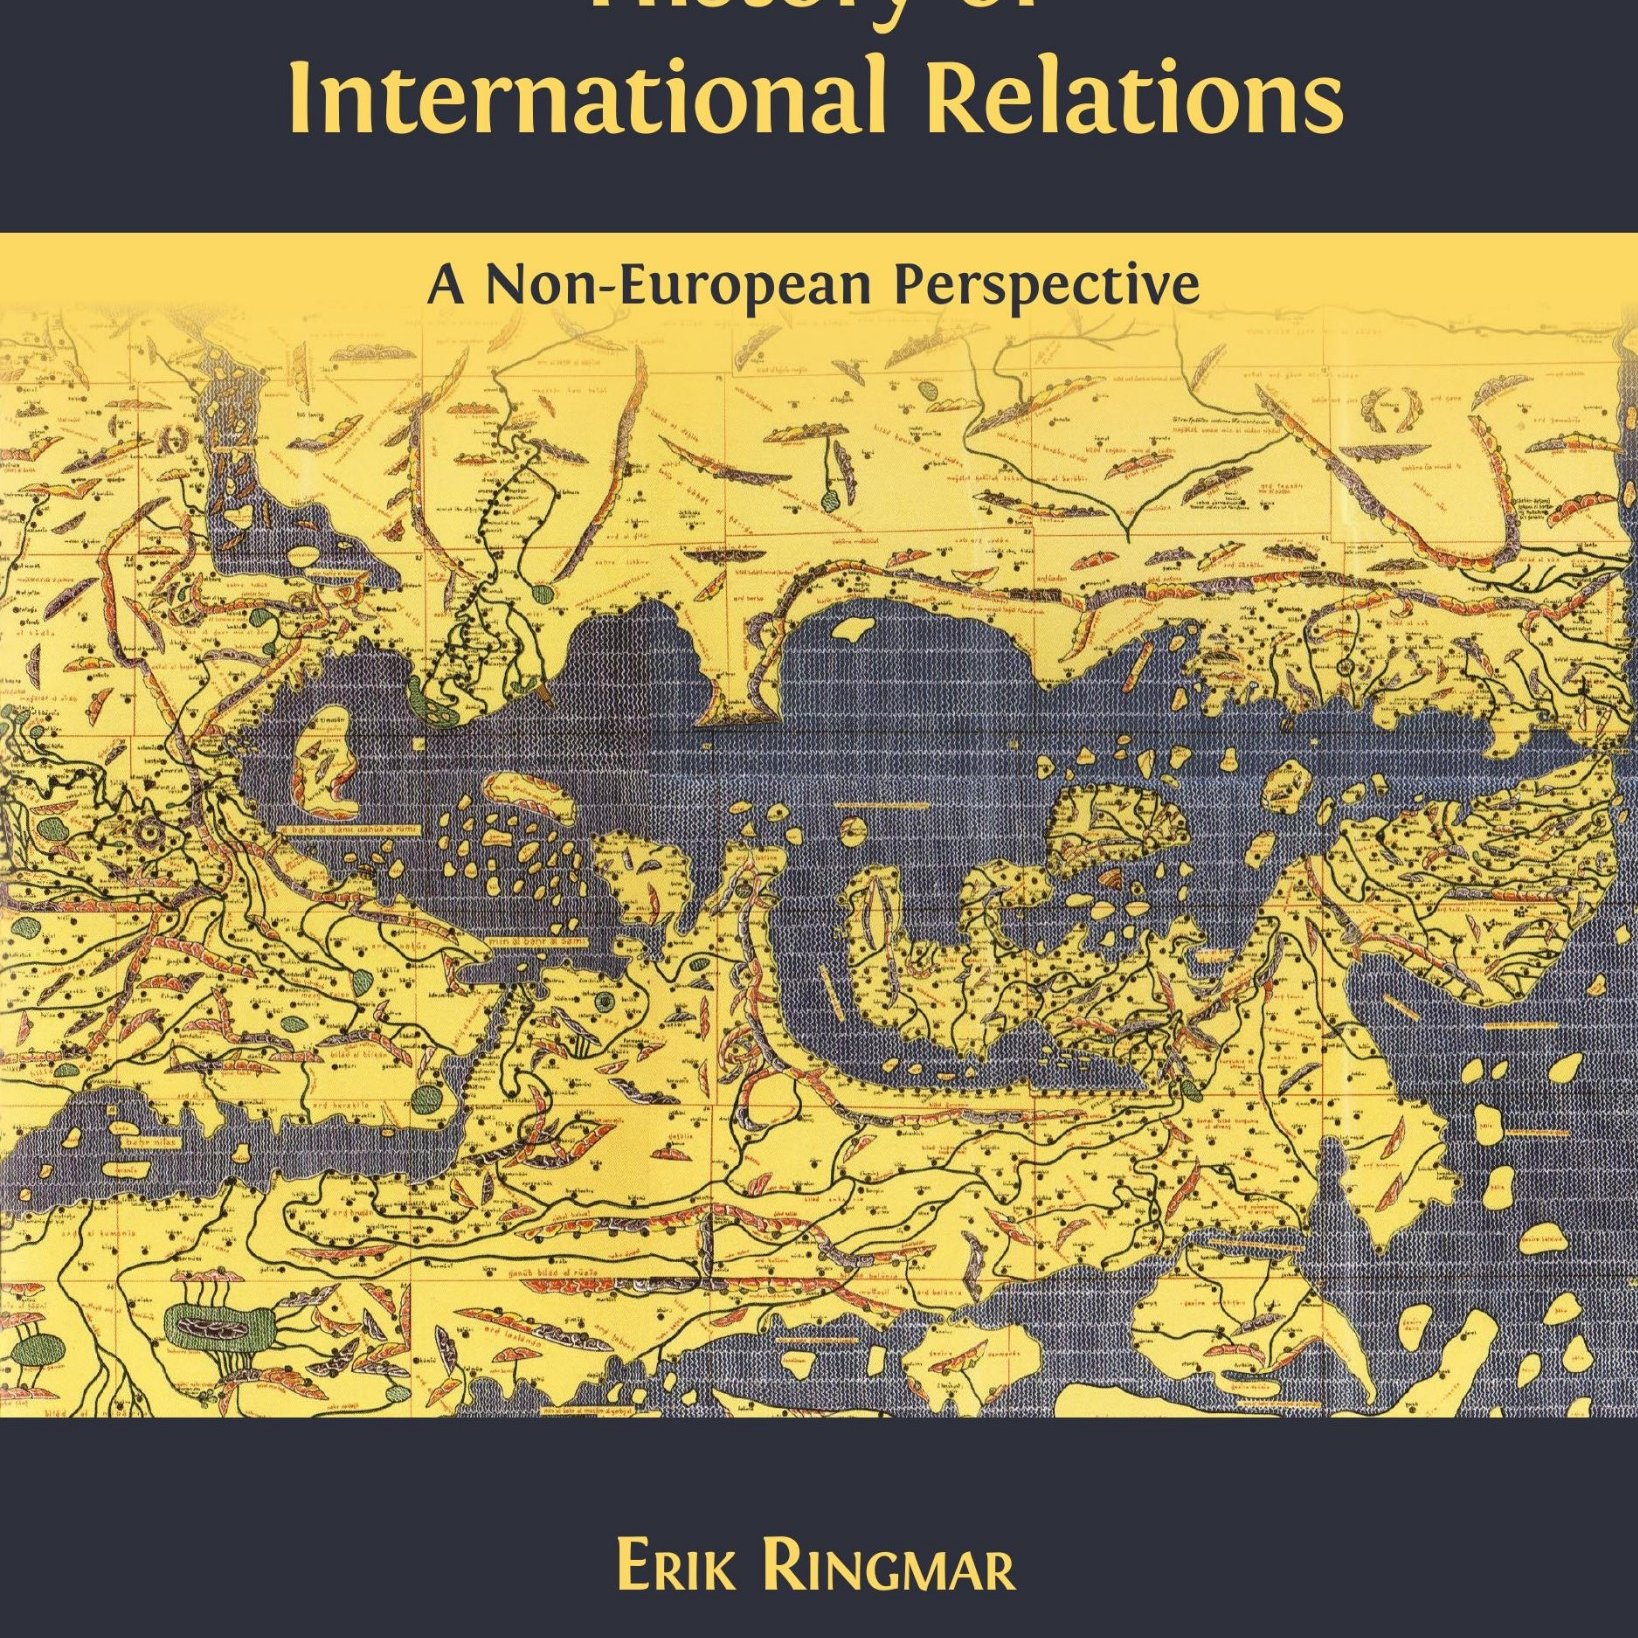 History of International Relations. A Non-European Perspective